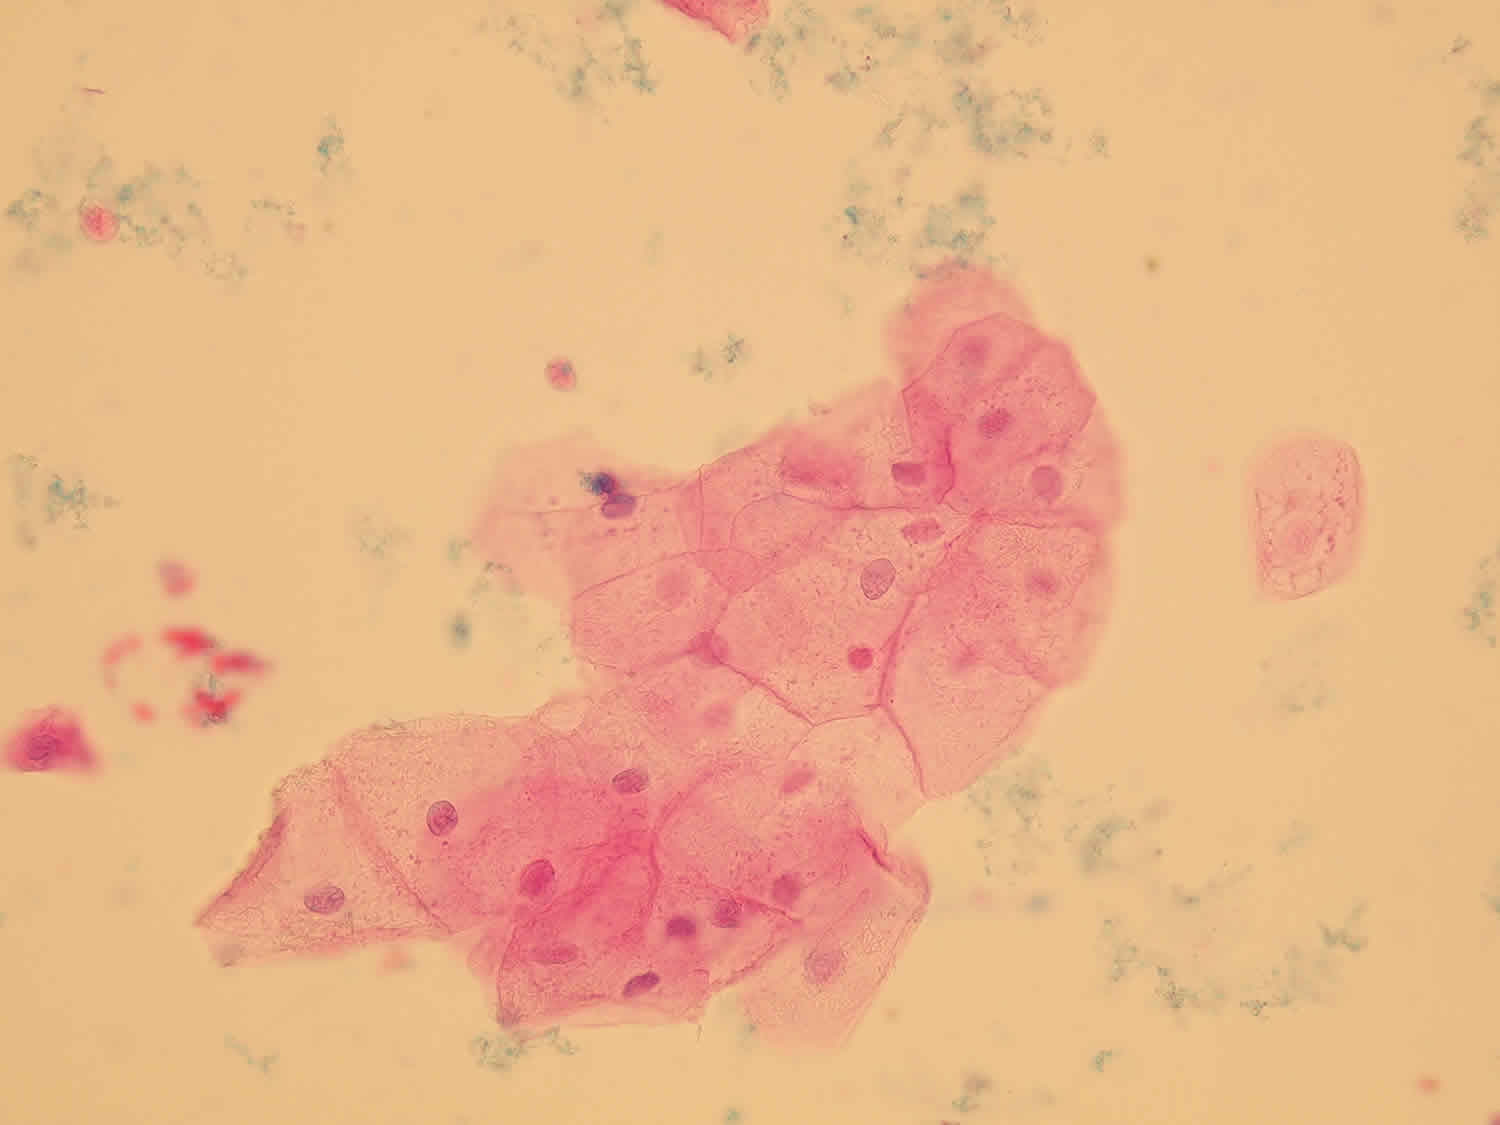 squamous epithelial cells in urine